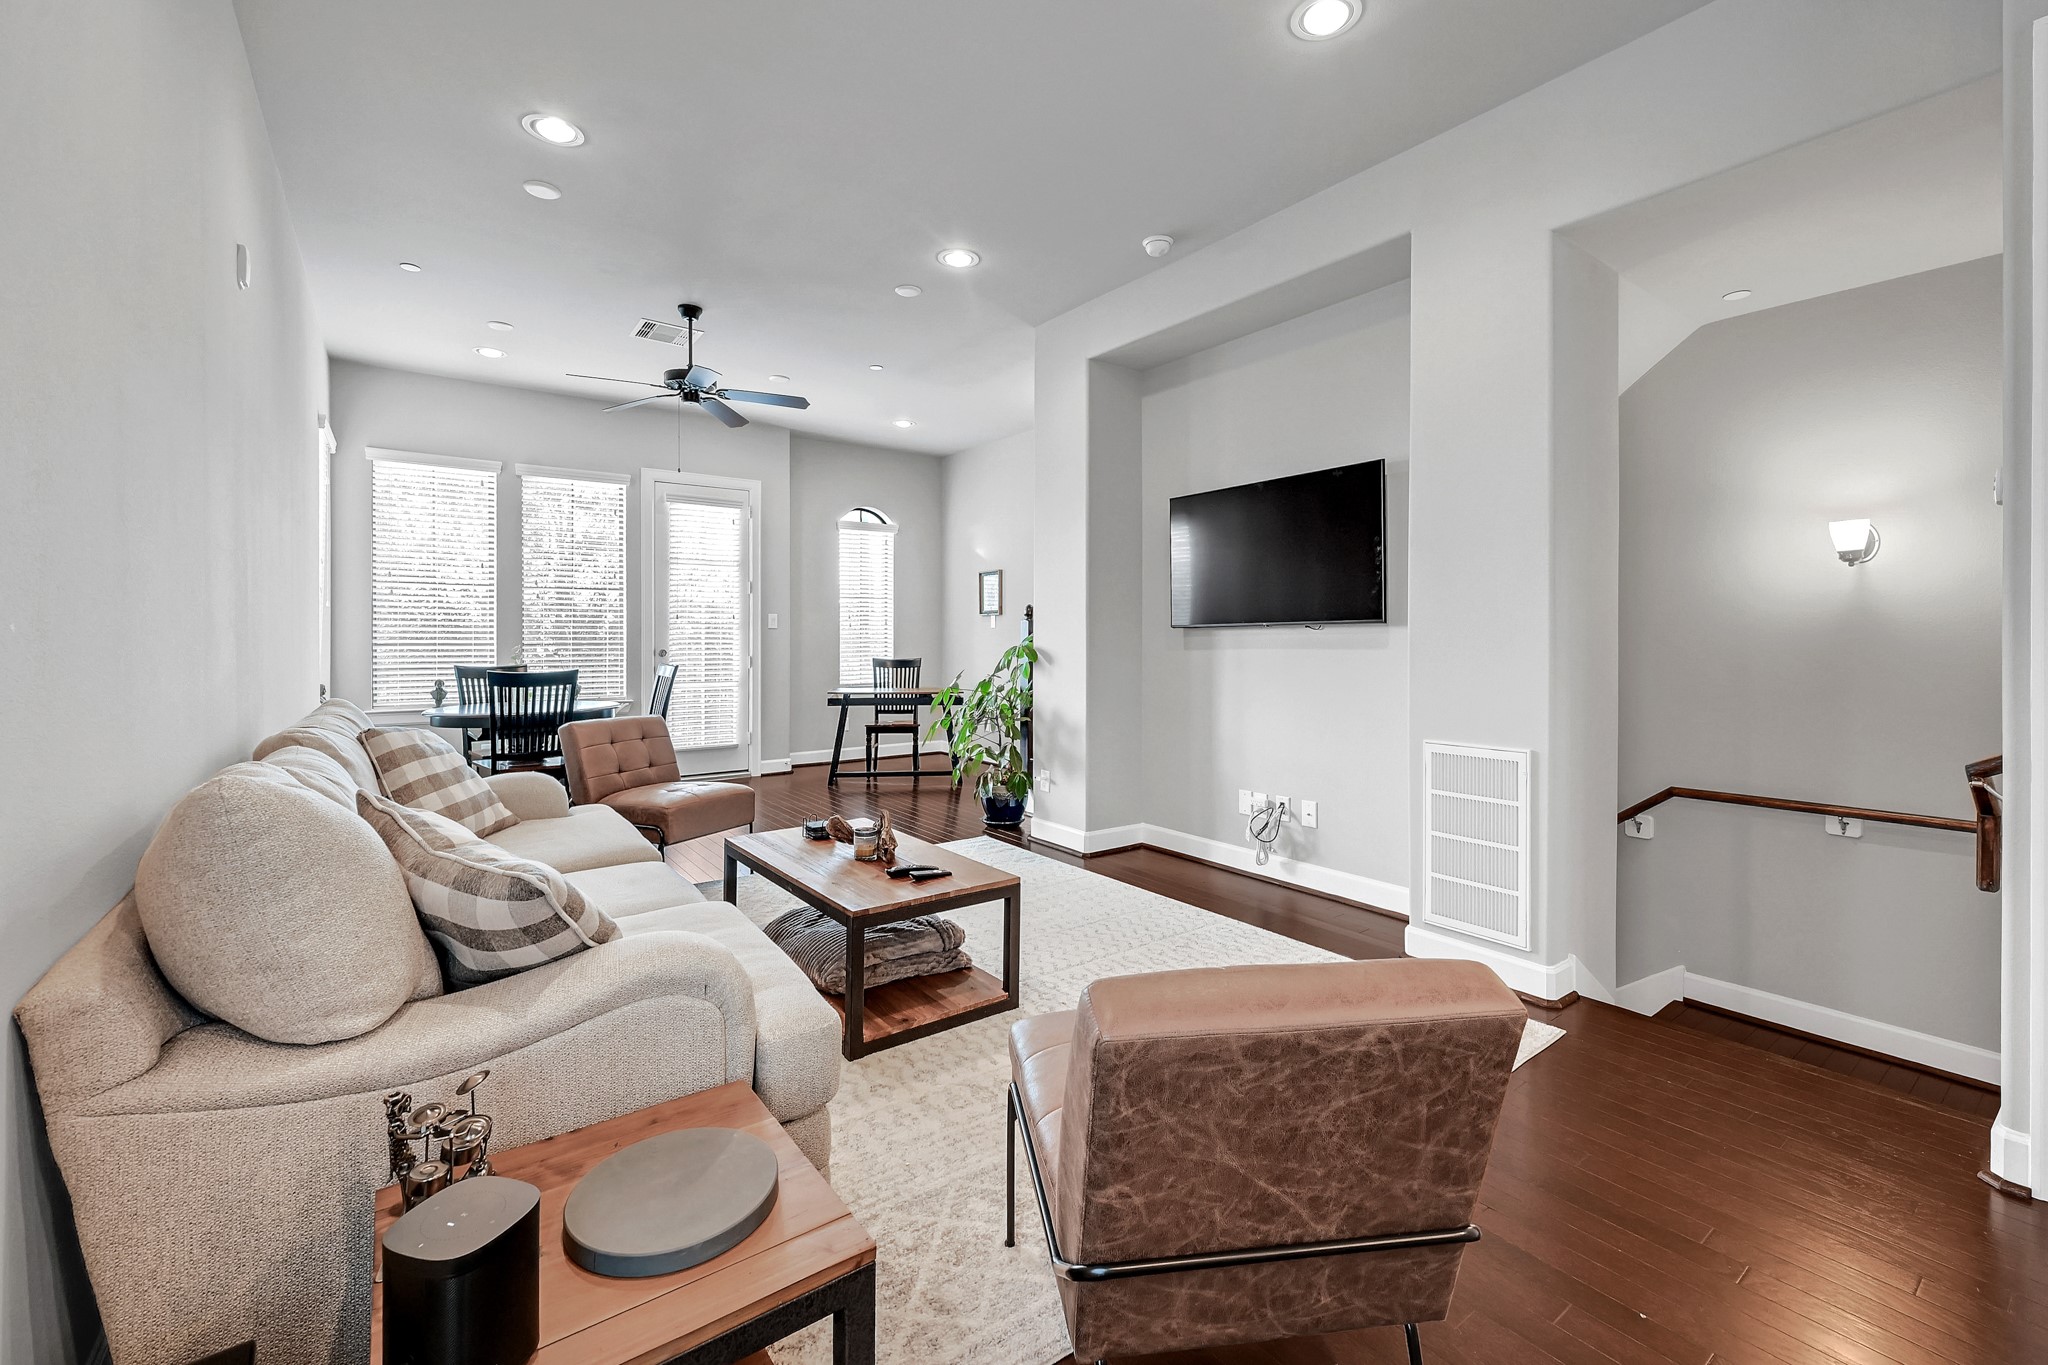 Hardwood floors extend the whole living space.